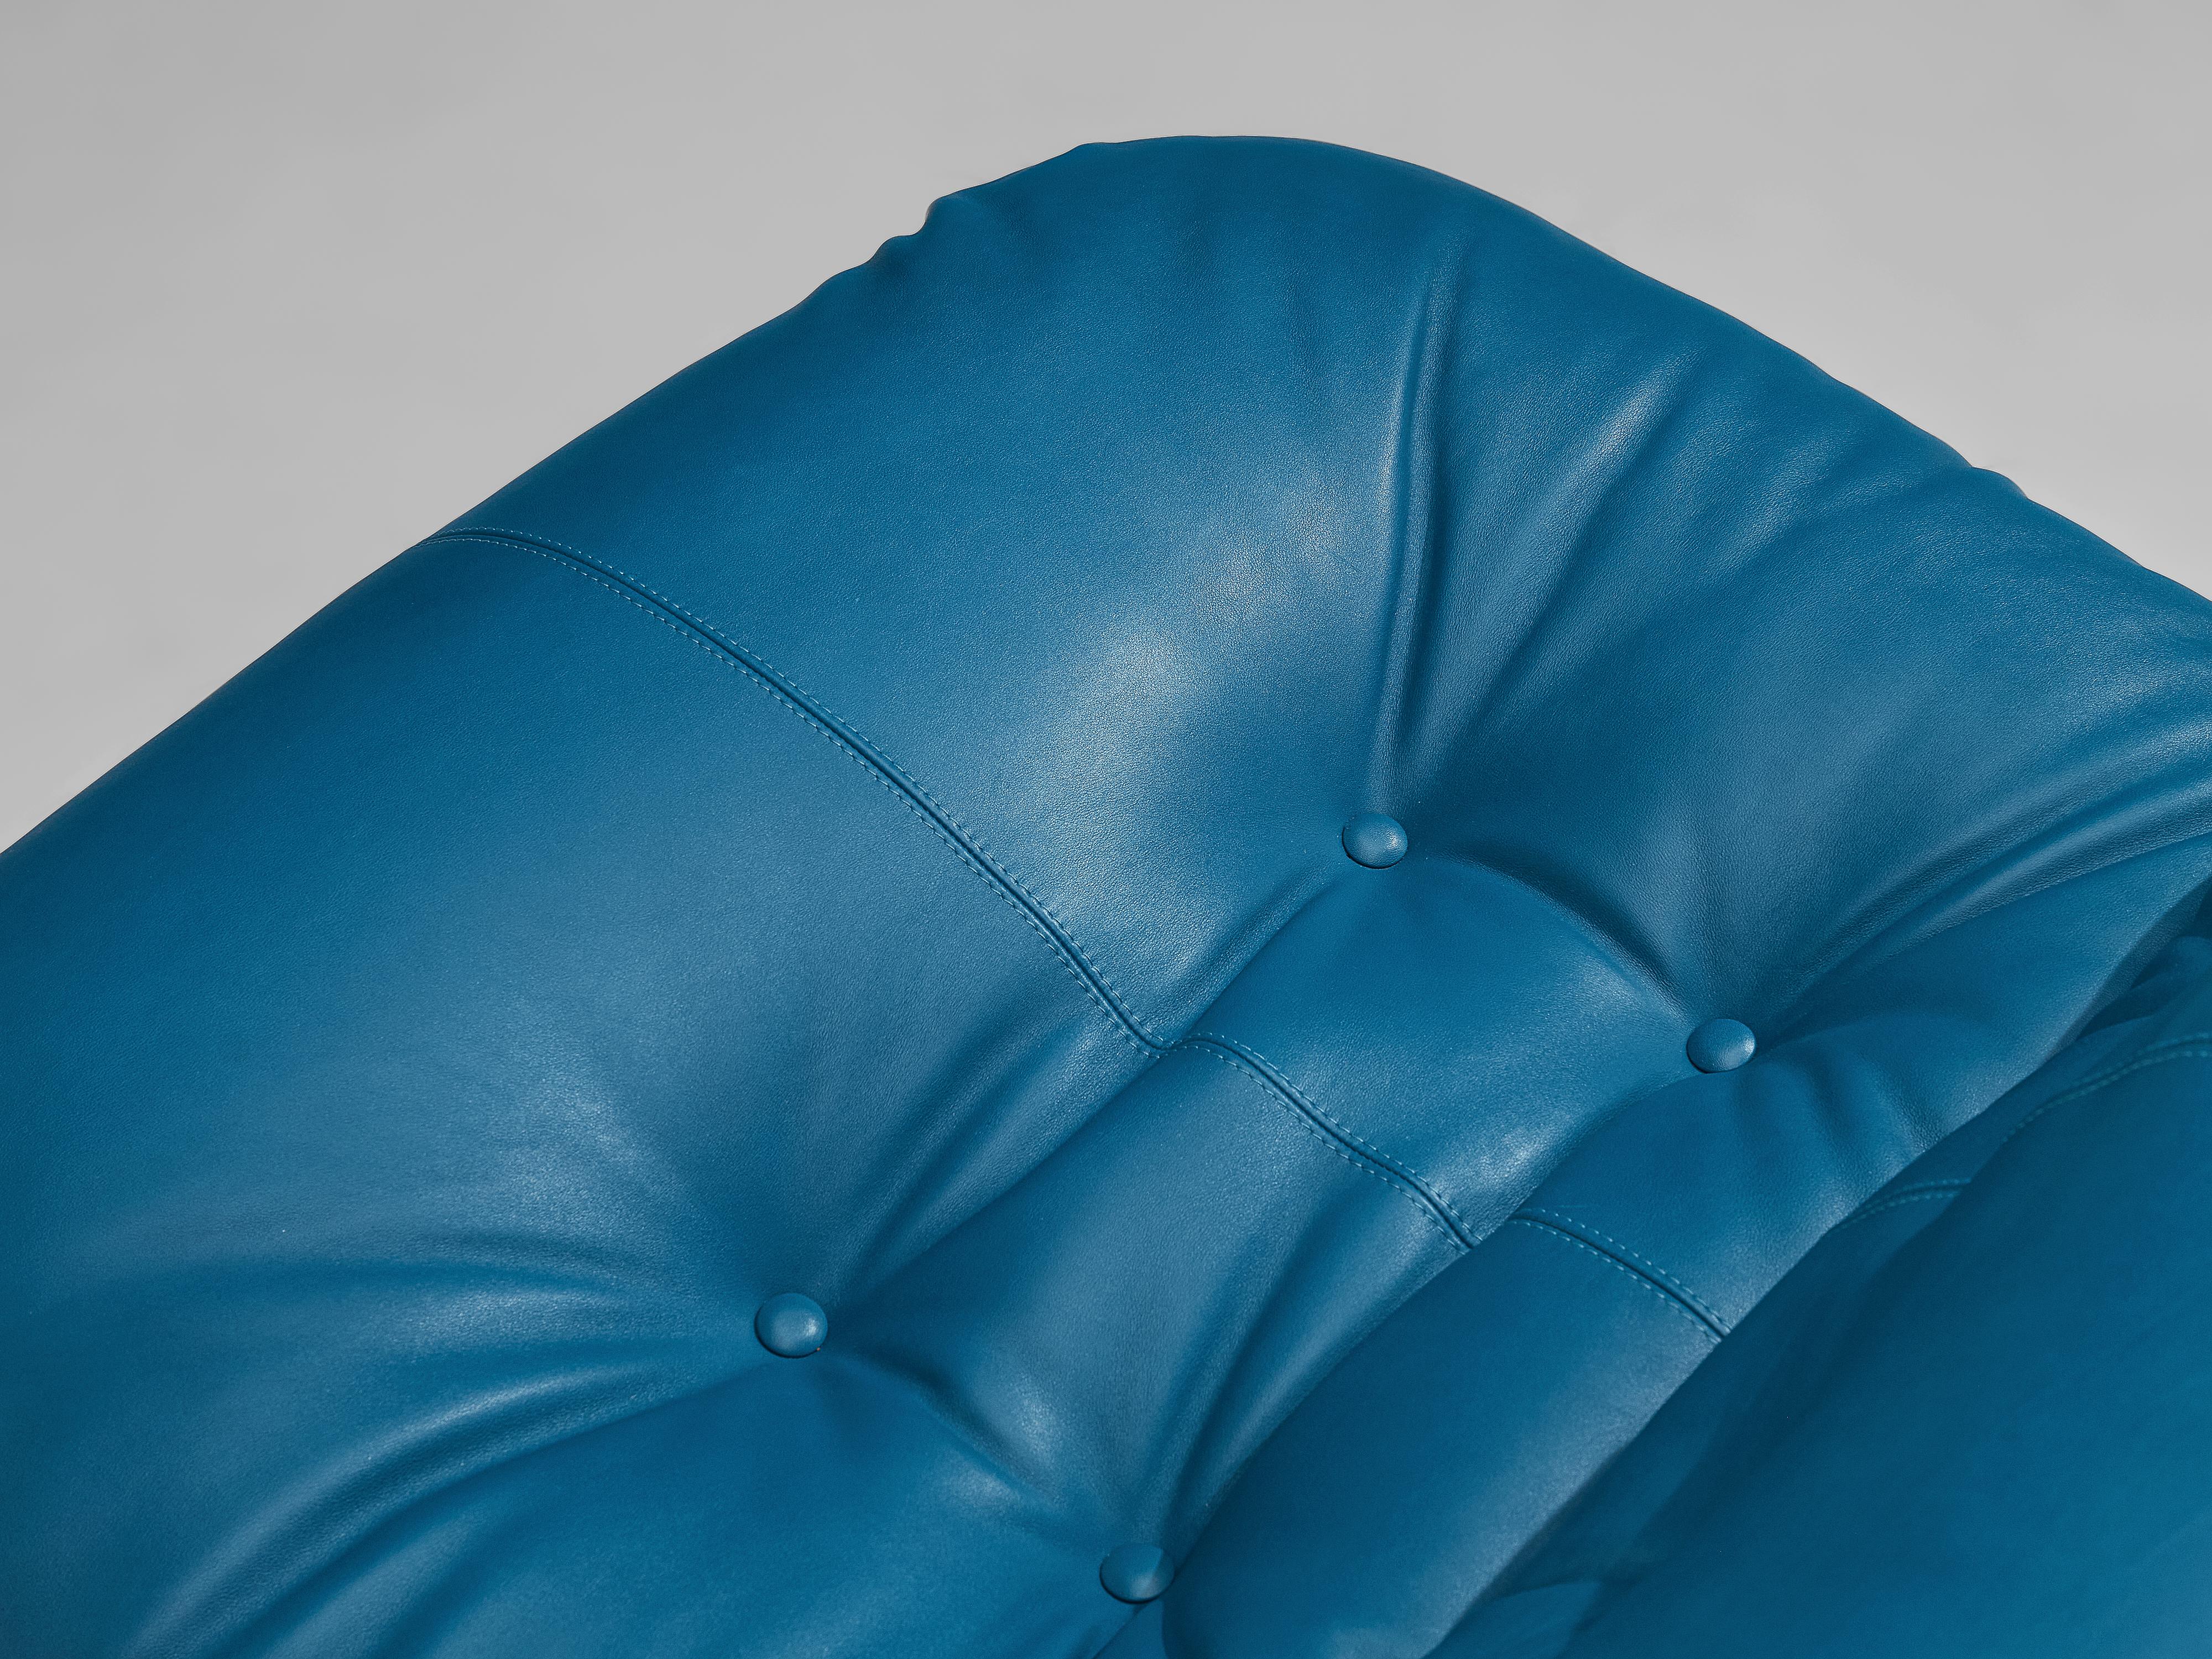 Afra & Tobia Scarpa 'Soriana' Lounge Chair with Ottoman in Blue Leather 6